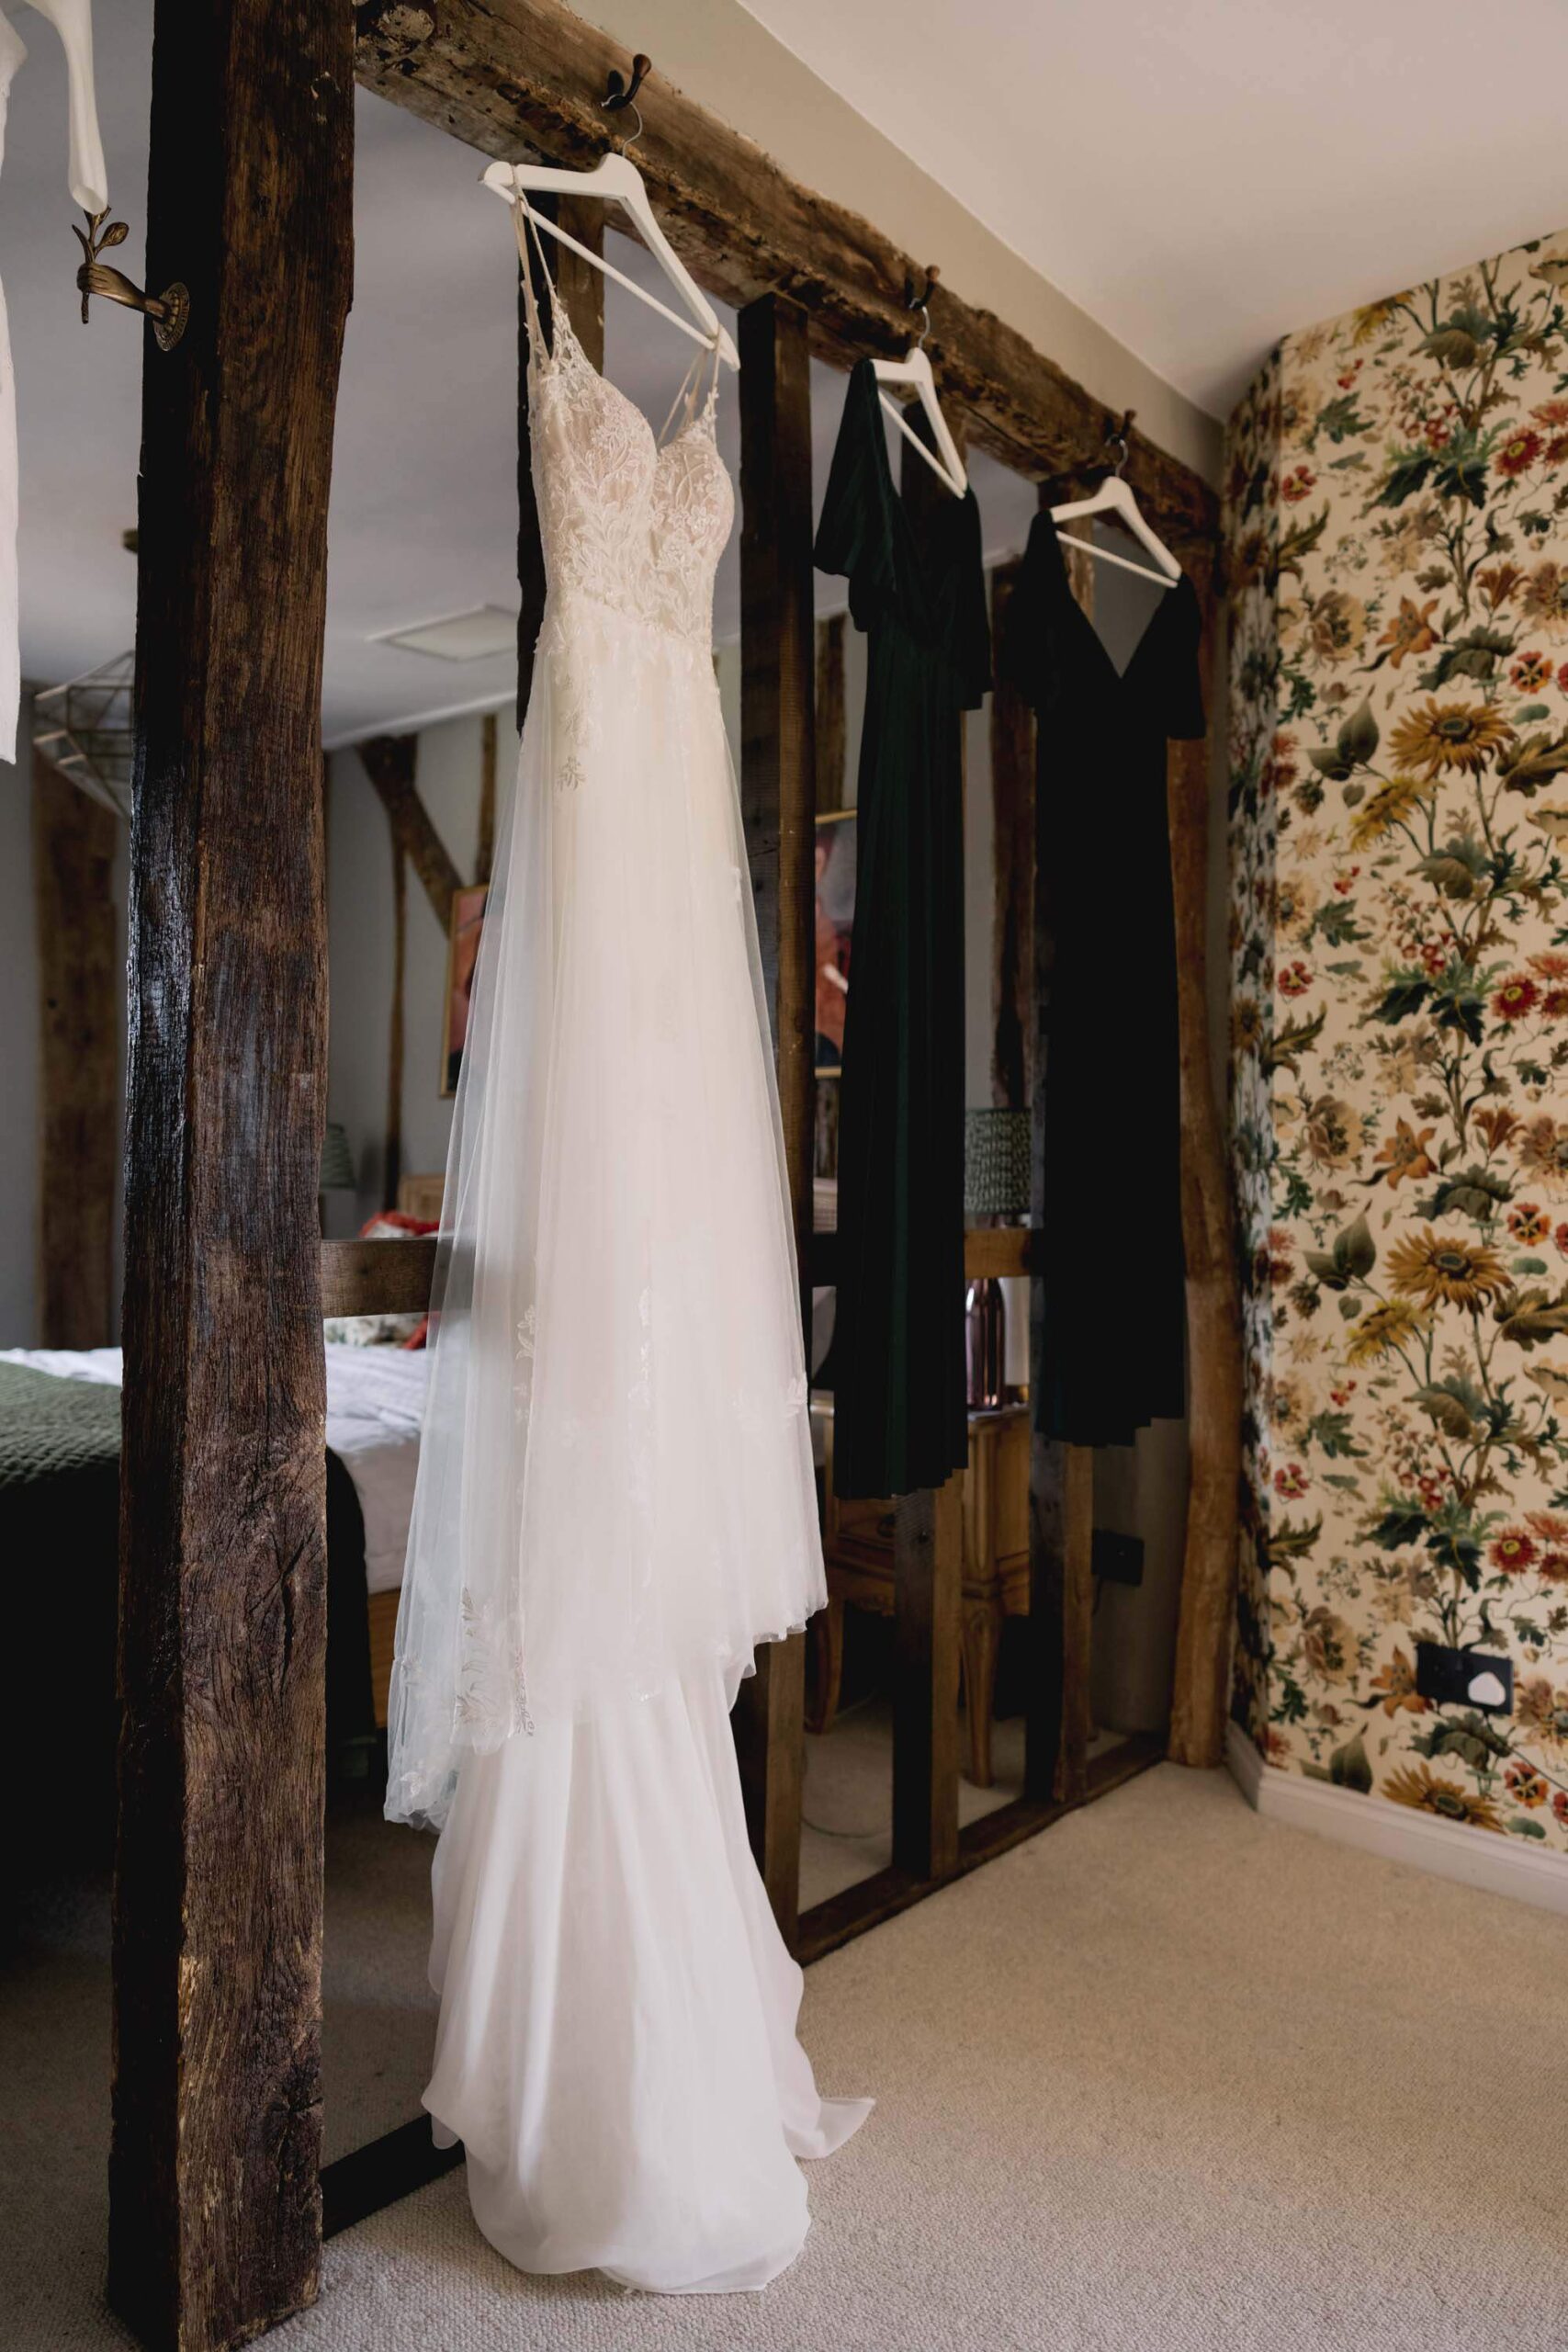 Bride's wedding dress hanging on an exposed beam at The Farmhouse at Redcoats in Hitchin.